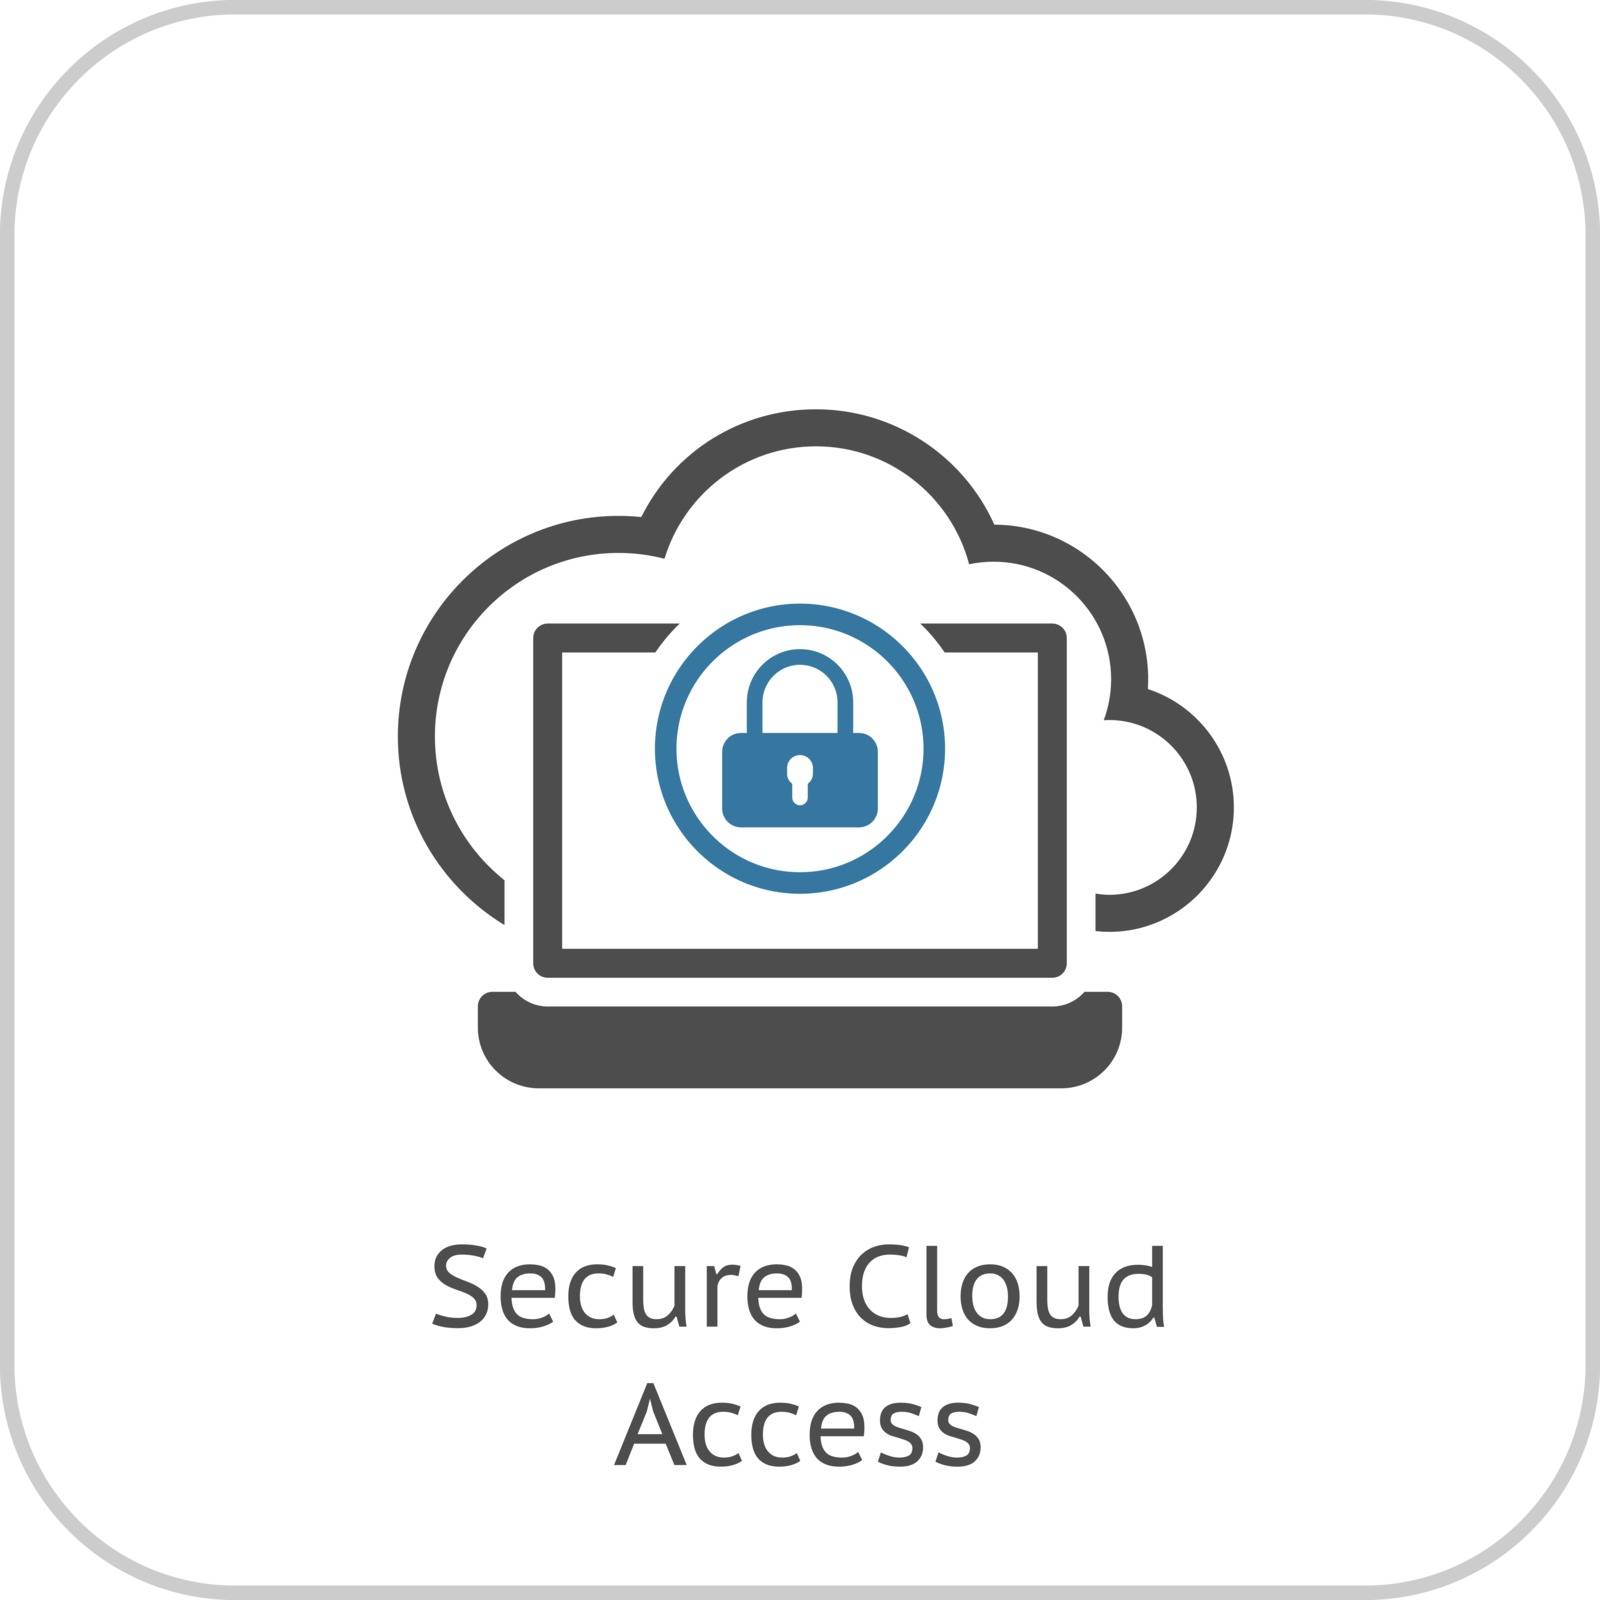 Secure Cloud Access Icon. Flat Design. by WaD